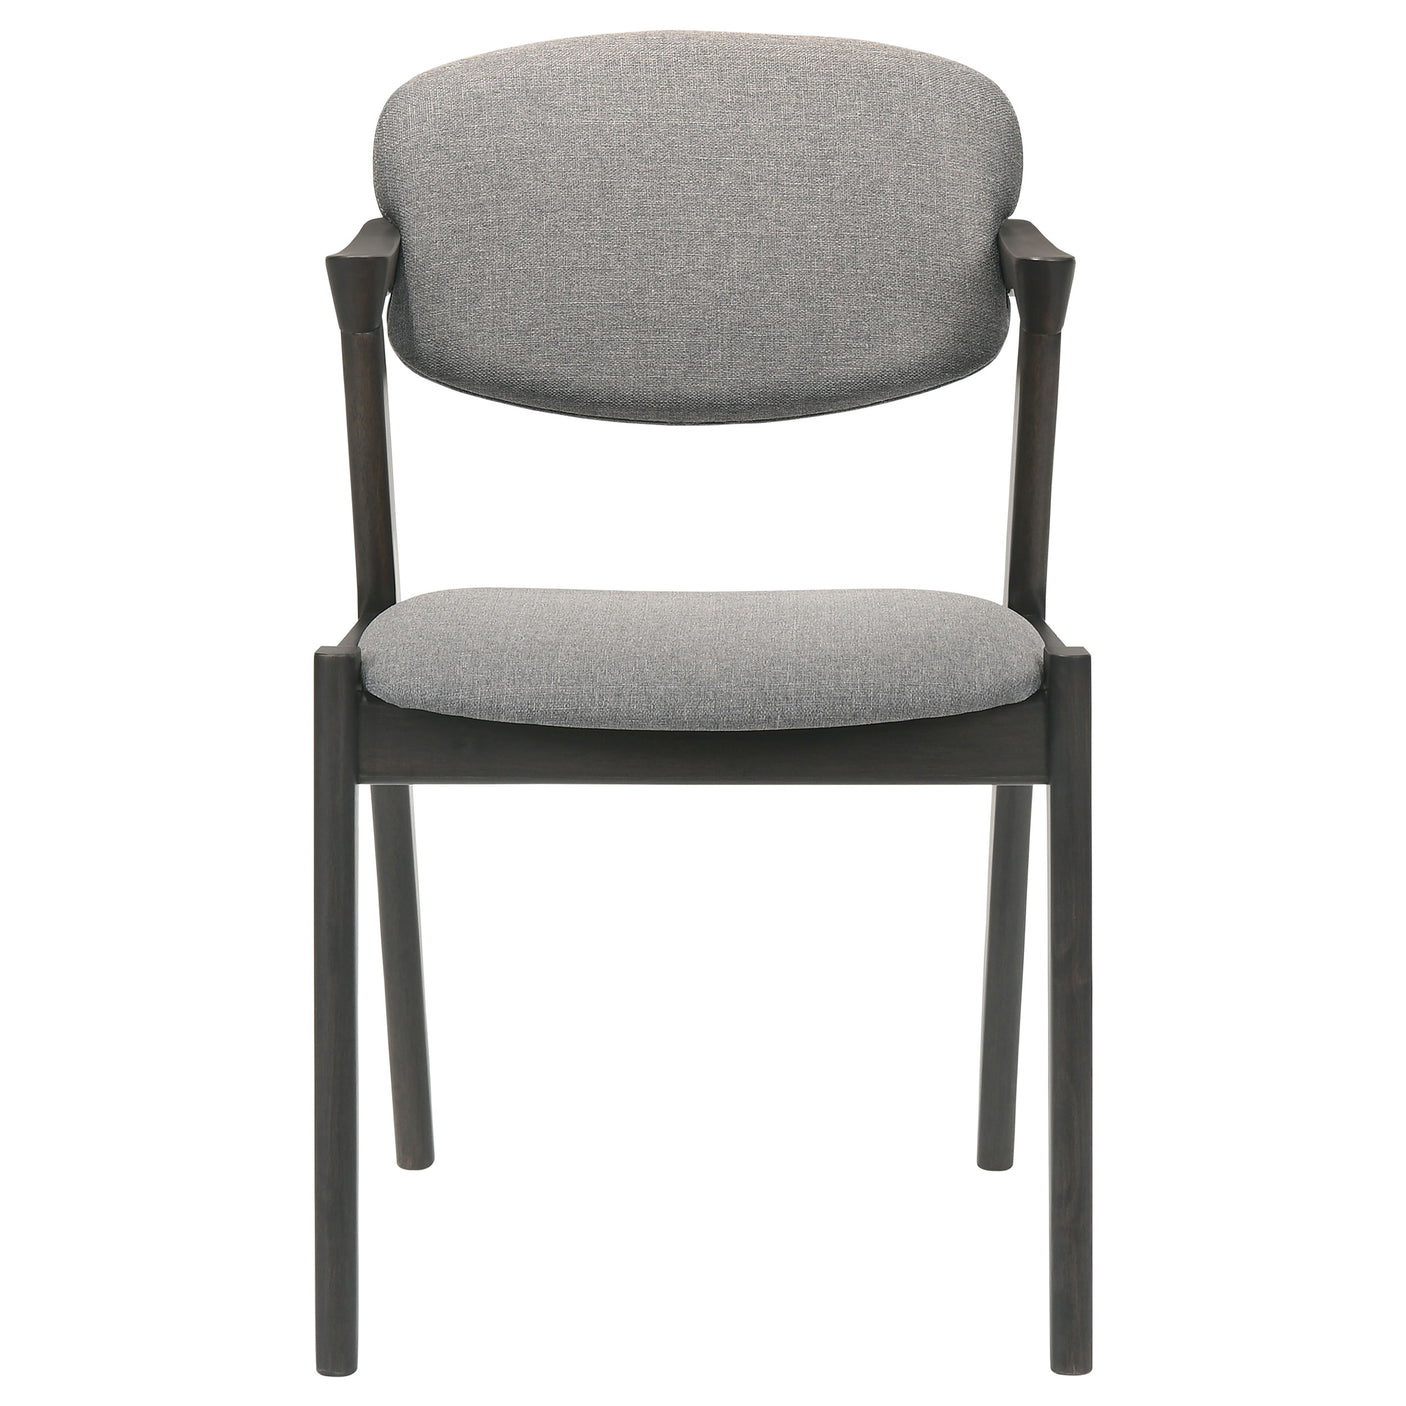 Arm Chair - Stevie Upholstered Demi Arm Dining Side Chairs Brown Grey and Black (Set of 2)